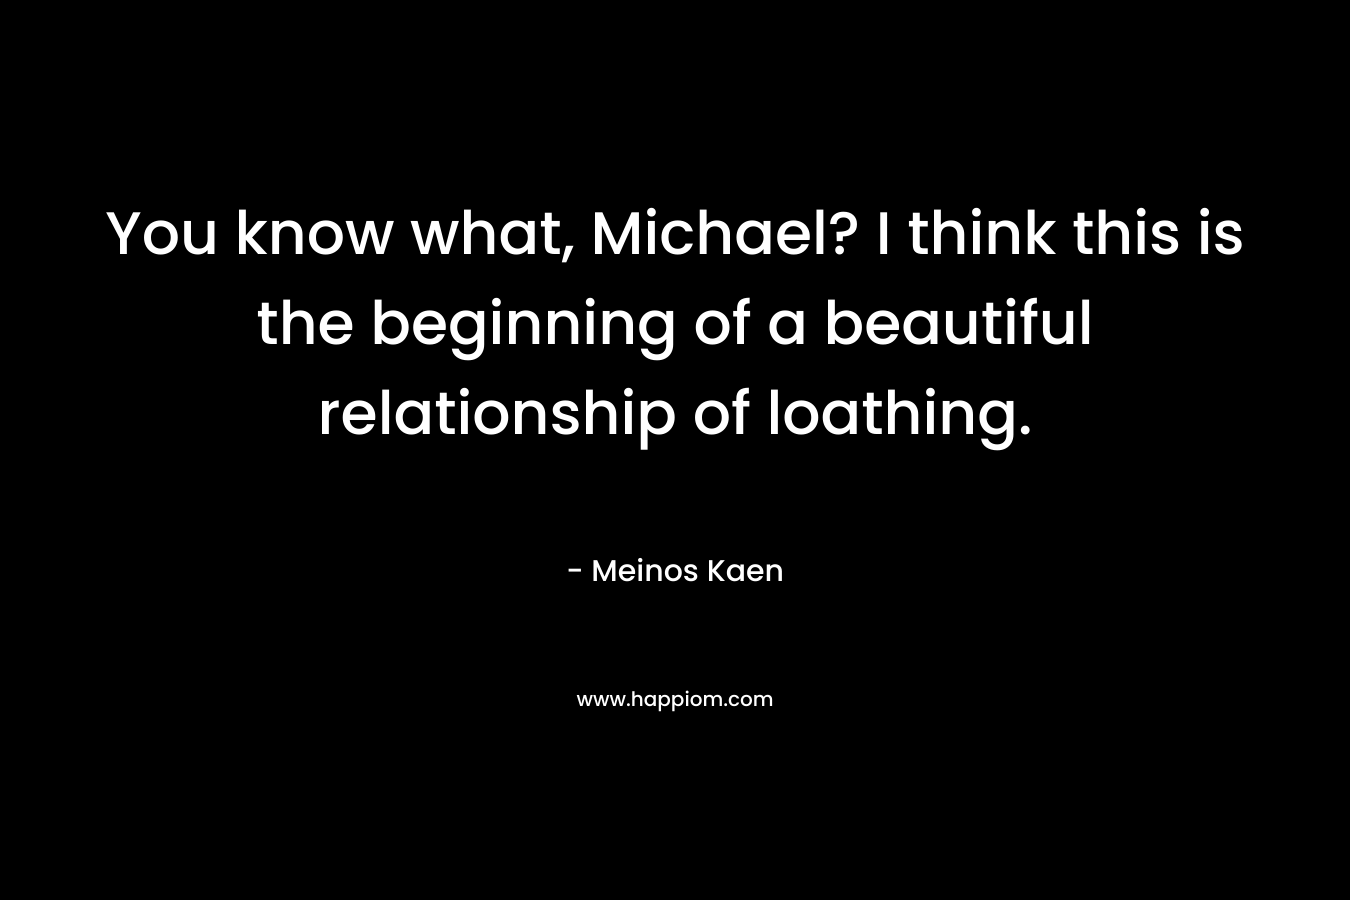 You know what, Michael? I think this is the beginning of a beautiful relationship of loathing.